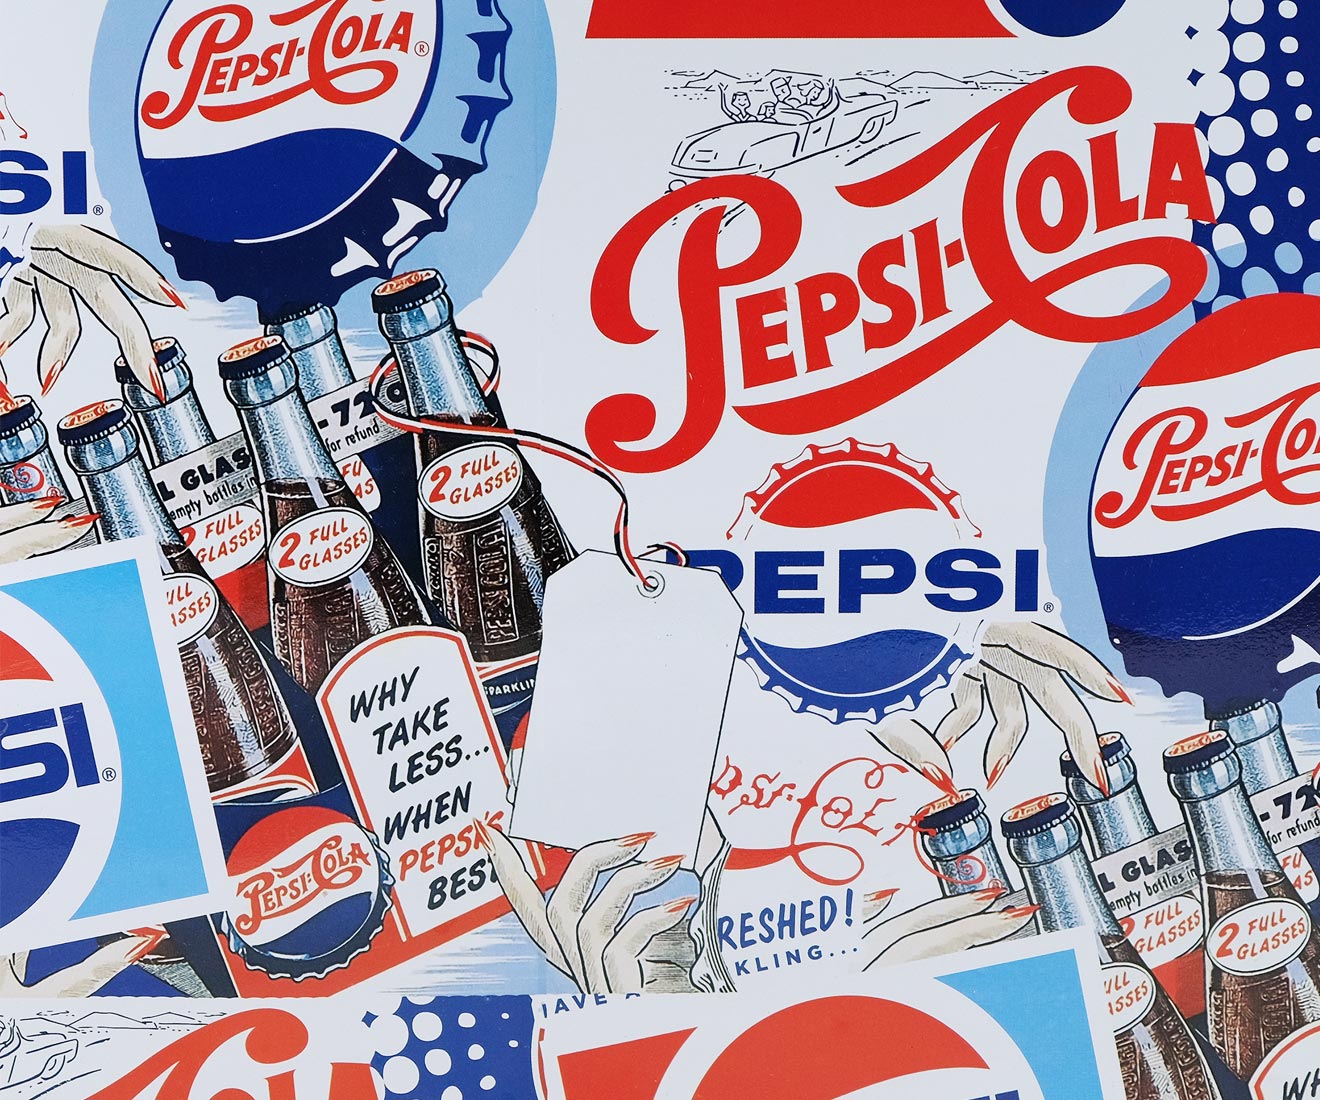 Pepsi 14-Quart Small Portable Picnic Cooler with Old Vintage Pepsi Logos Officially Licensed Cooler Personal Cooler Product Features Image 4